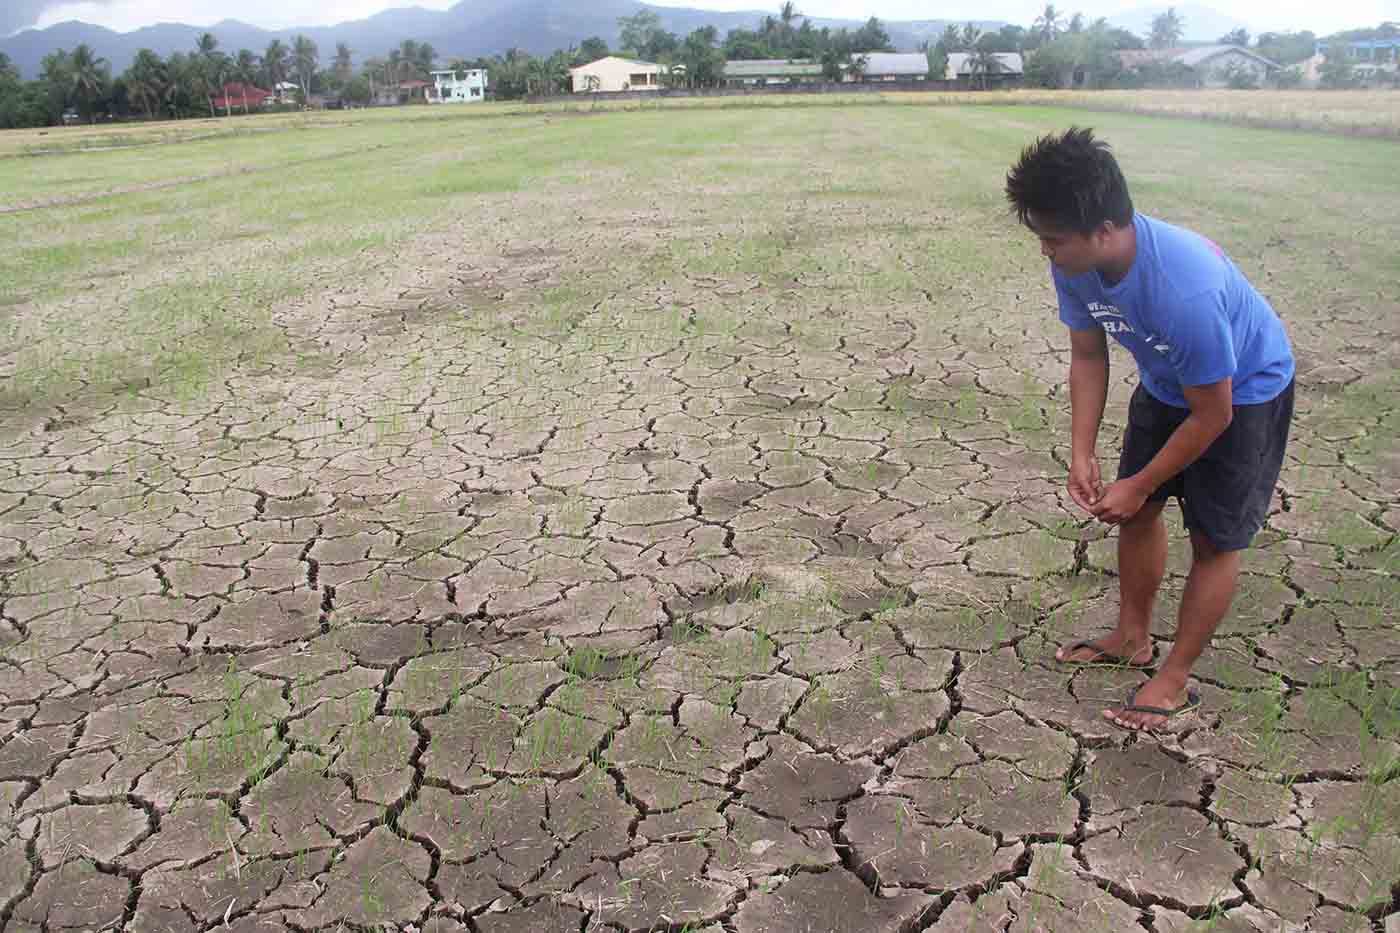 Act now on water security, groups tell gov’t ahead of El Niño